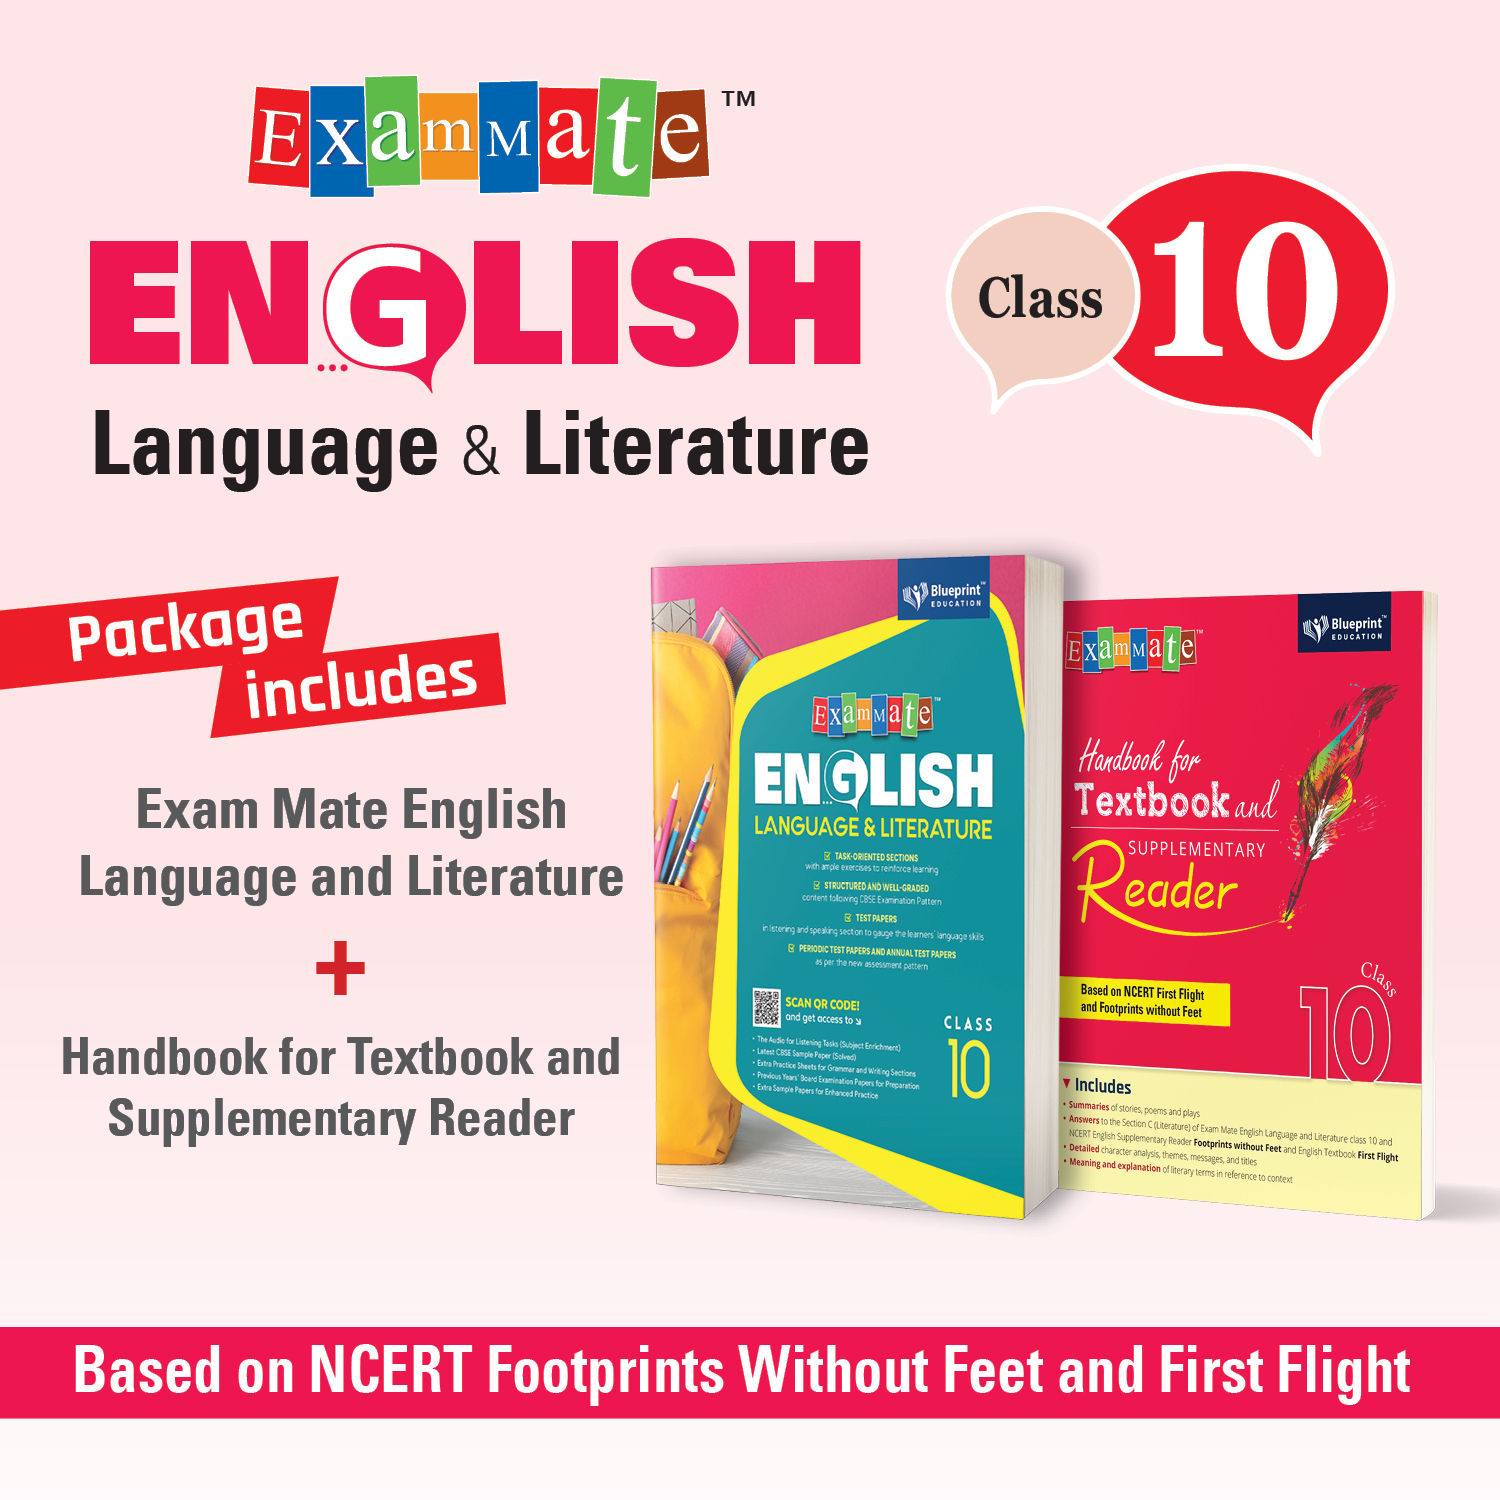 Exam Mate English Language & Literature for Class 10 (With Handbook for Textbook and Supplementary Reader)